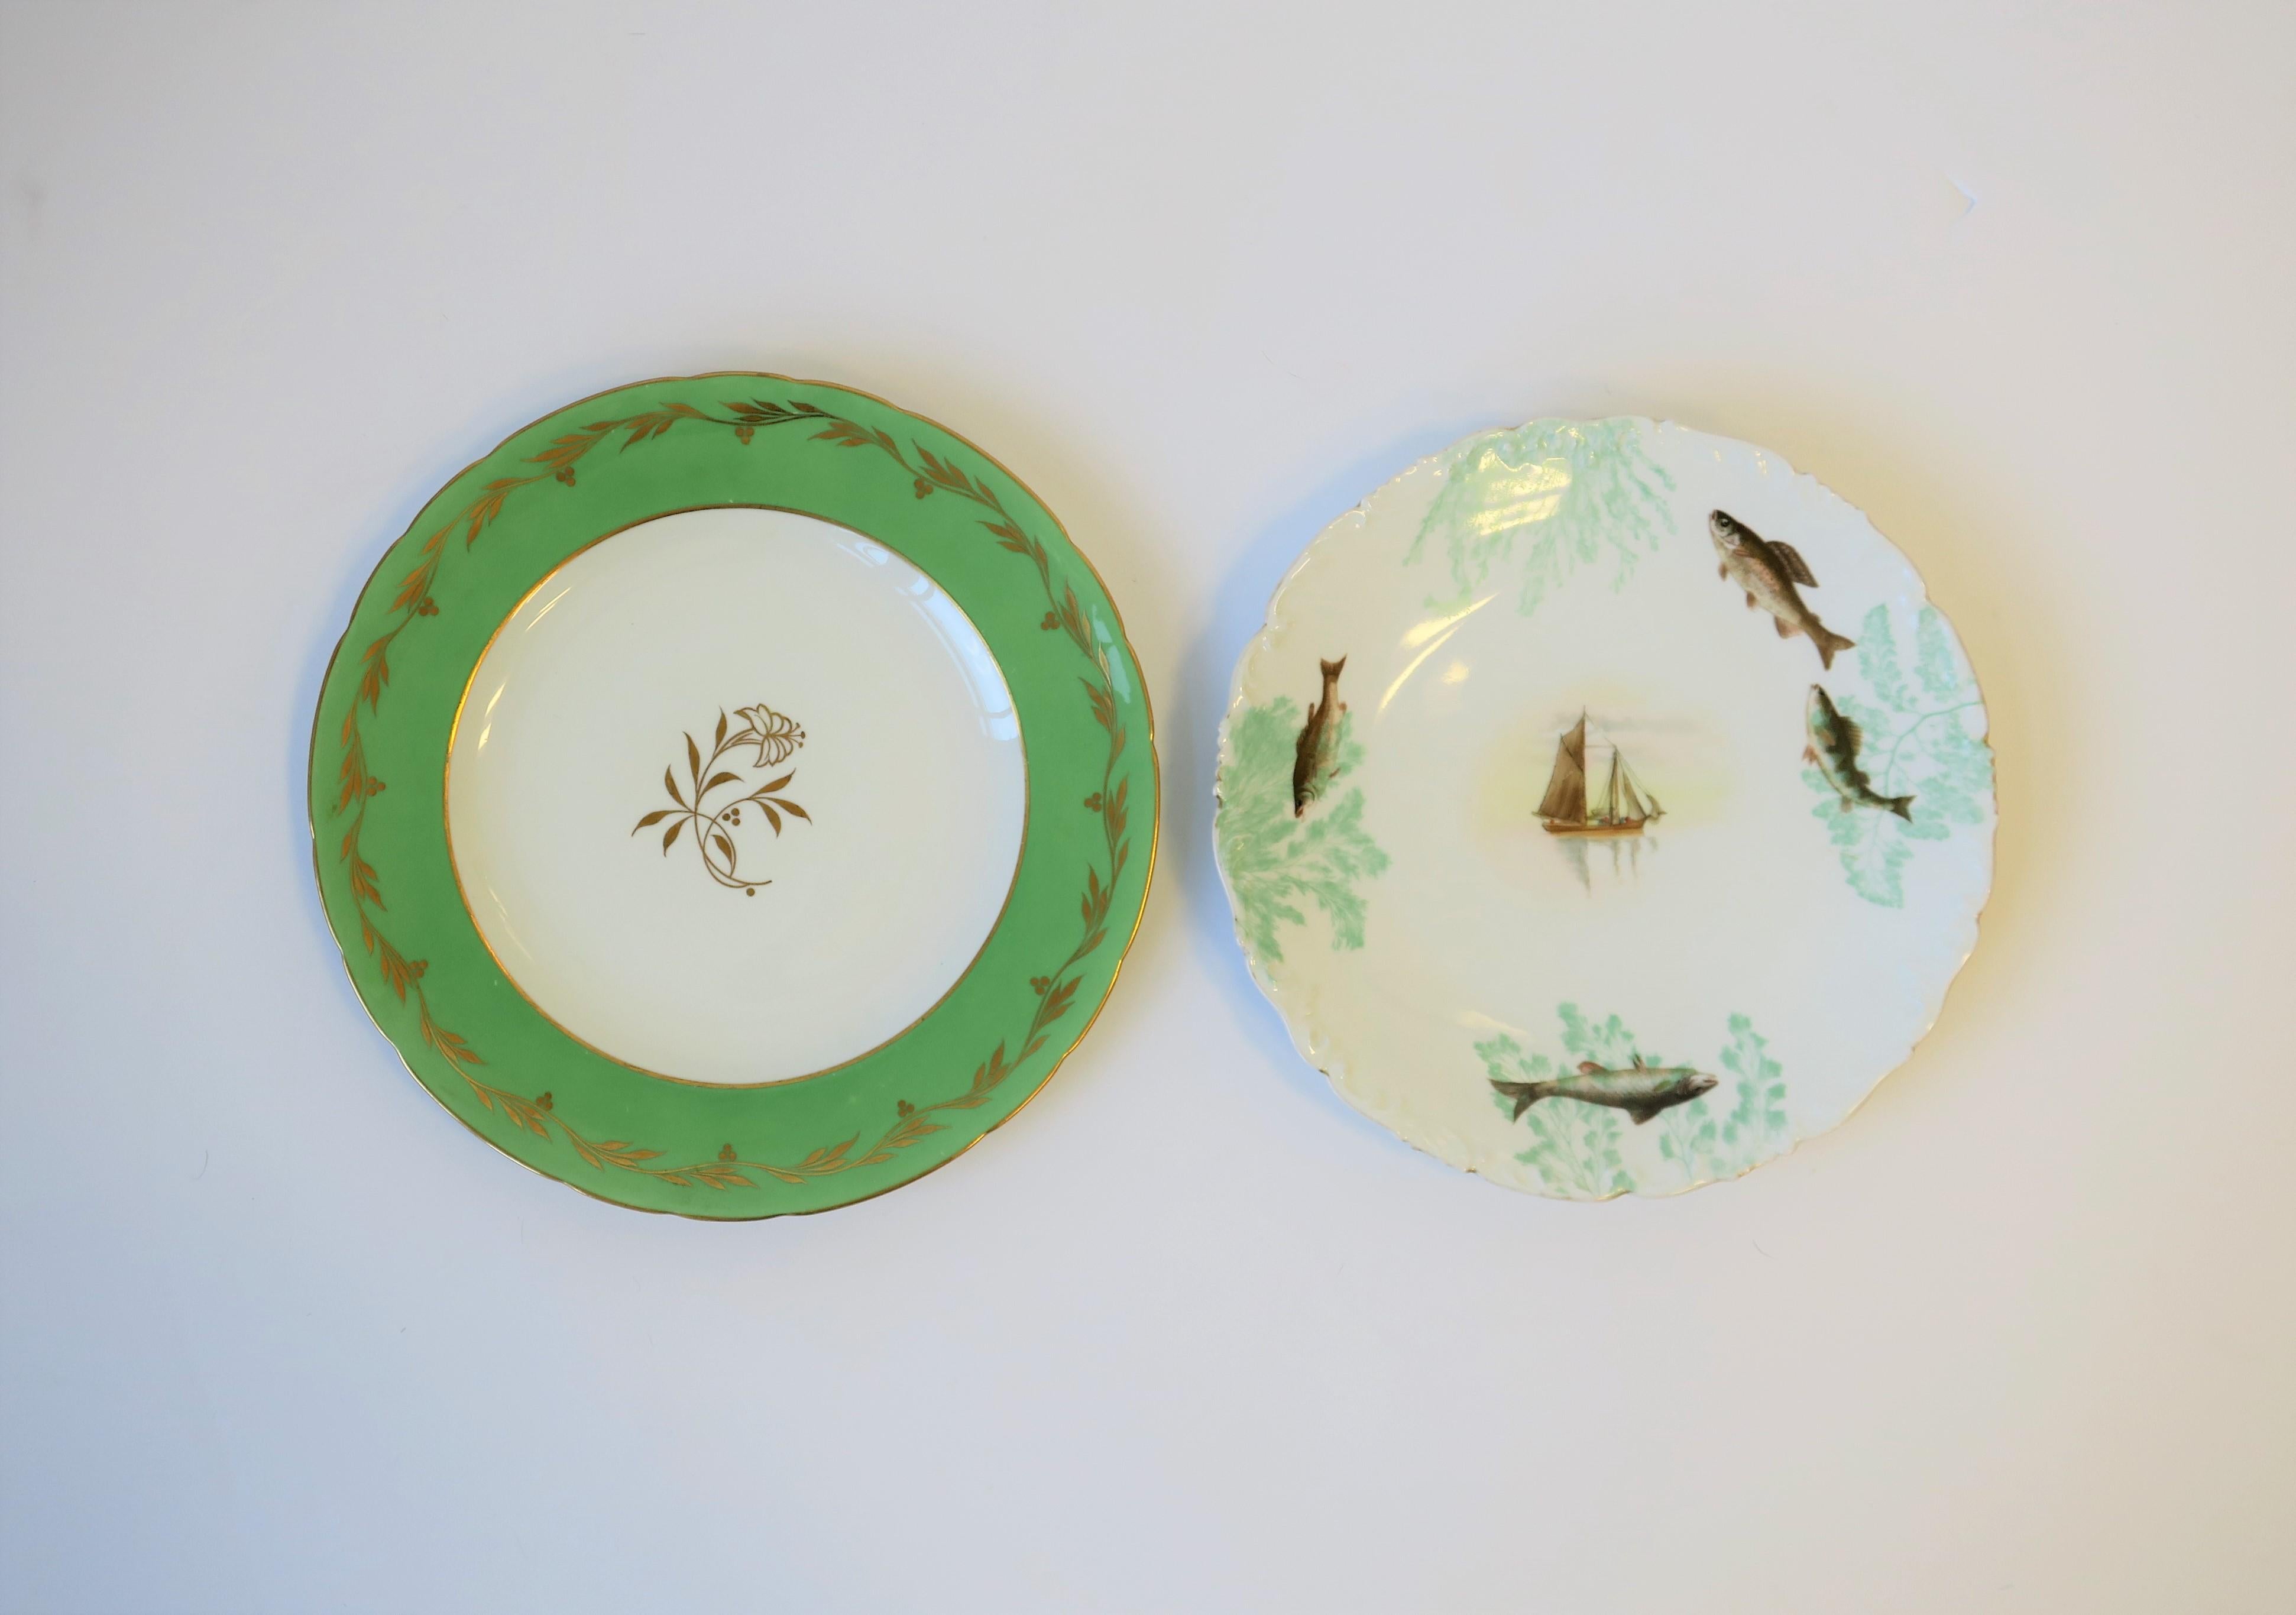 French Limoges Porcelain Dinner Plates with Rustic Fish & Boat Design, Set of 8 For Sale 12